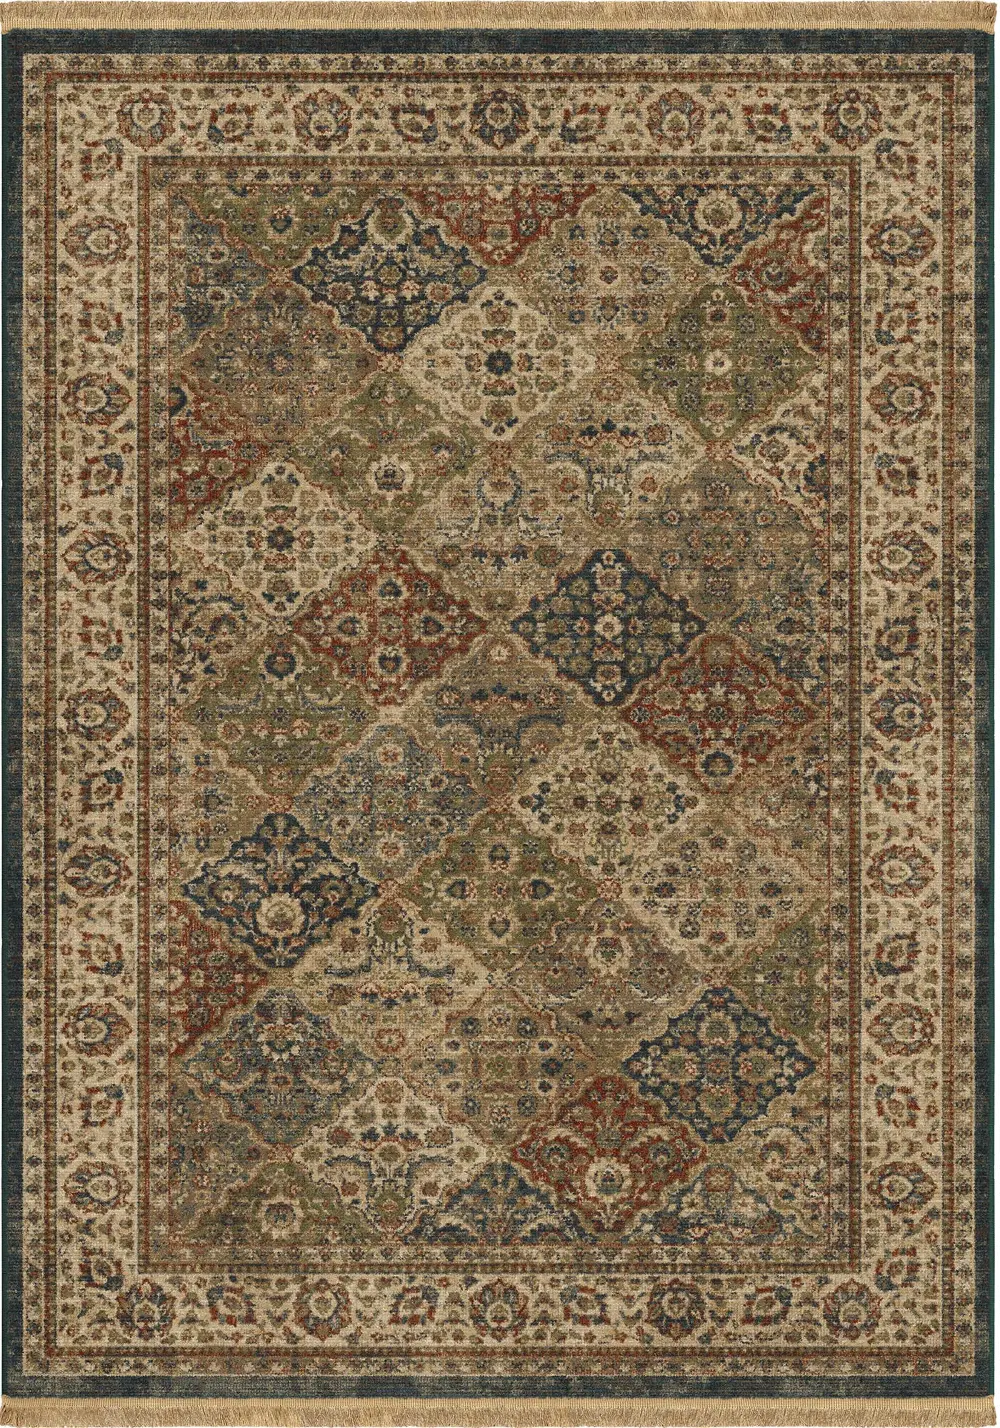 8100/8X11/MARRAKESH 8 x 11 Large Transitional Multi-Colored Area Rug - Marrakesh-1